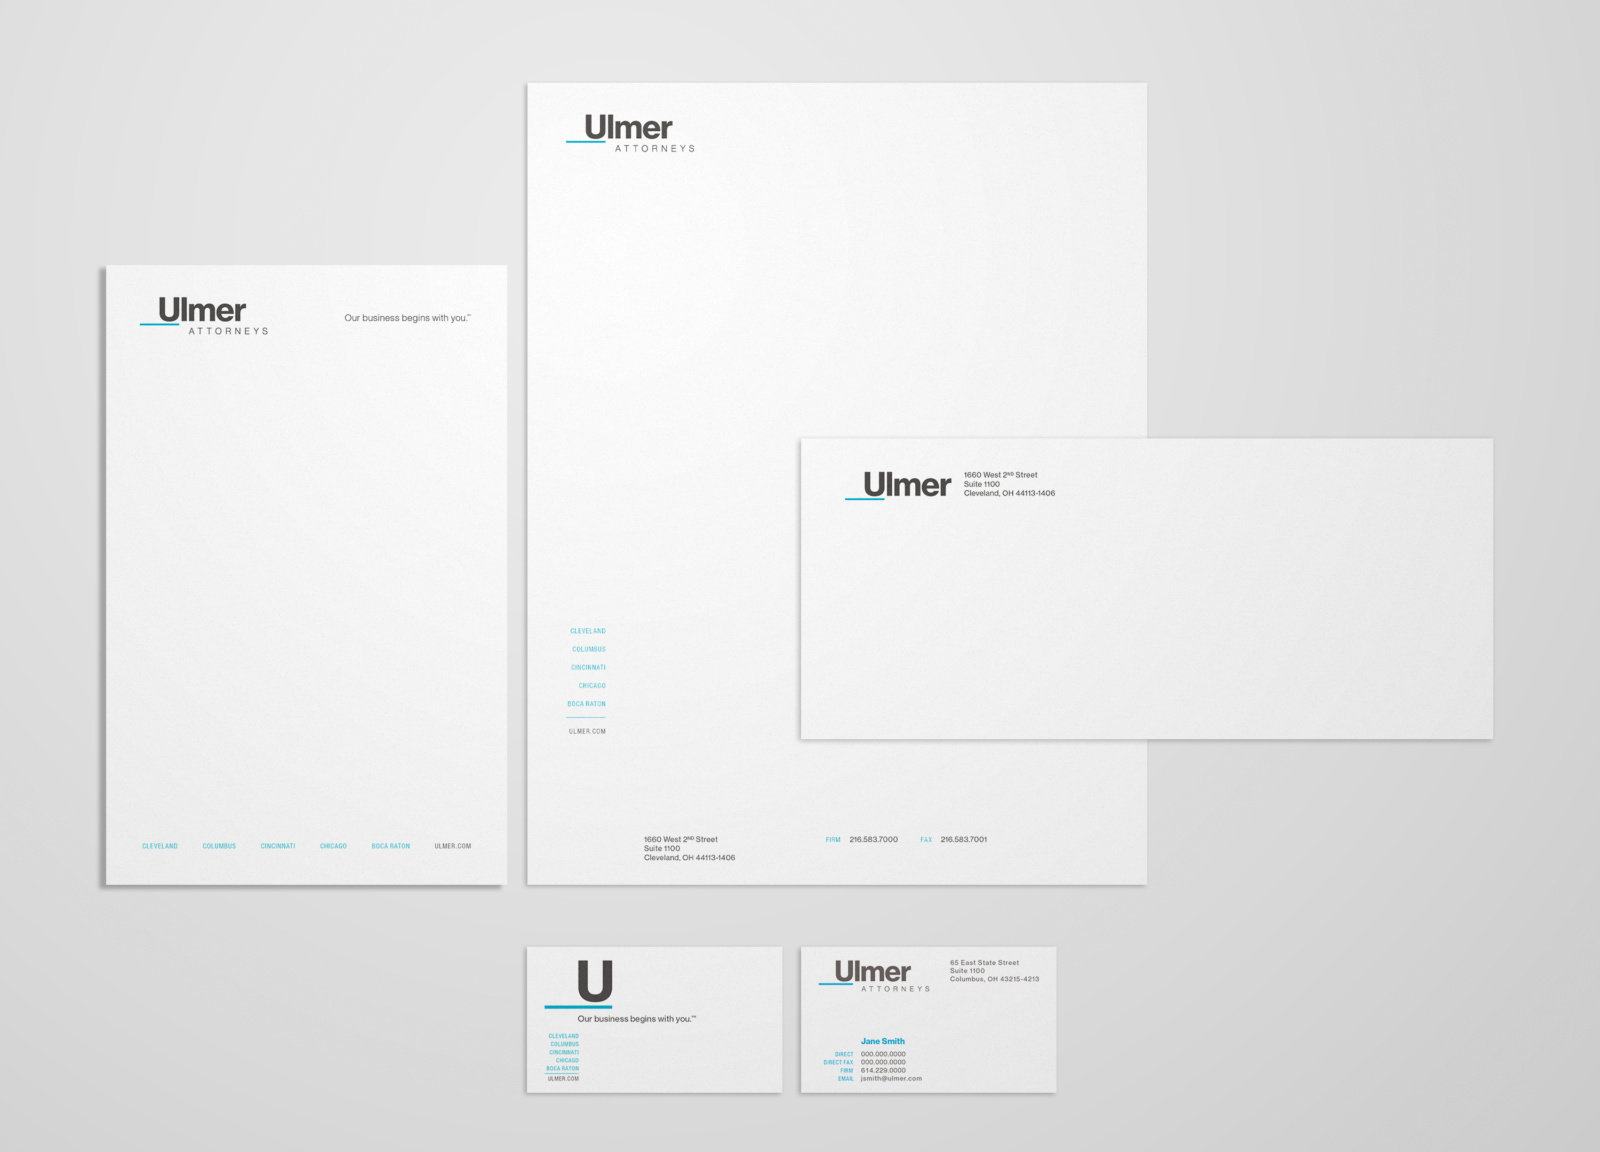 Print design for Ulmer business papers, featuring letterhead, notepad, business cards, and business envelope